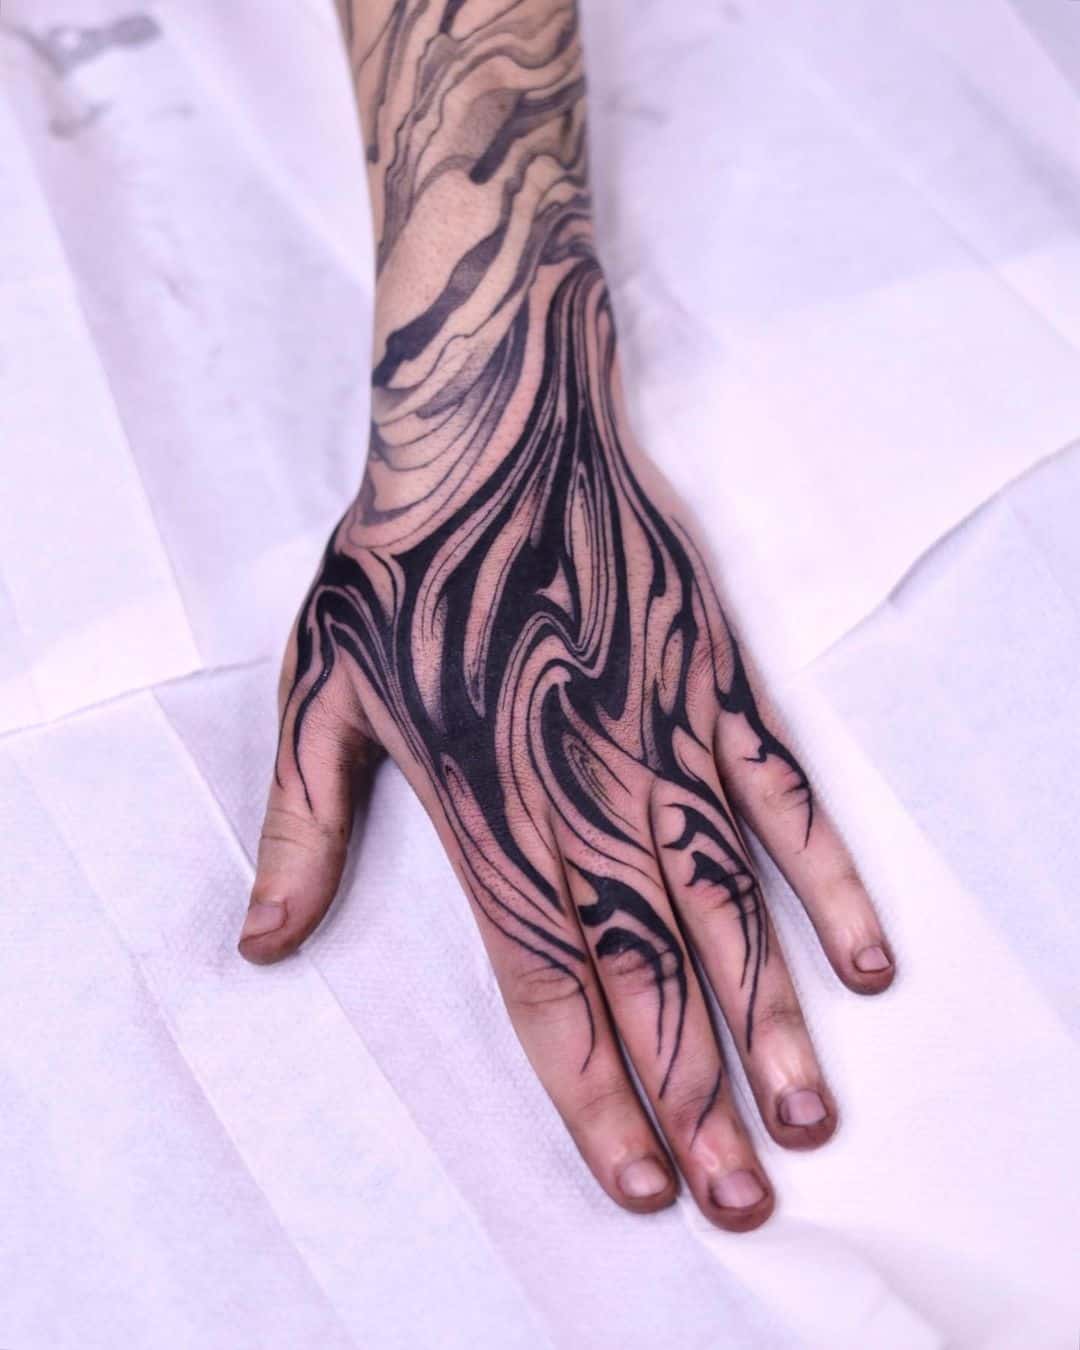 Abstract tattoo by voldblk